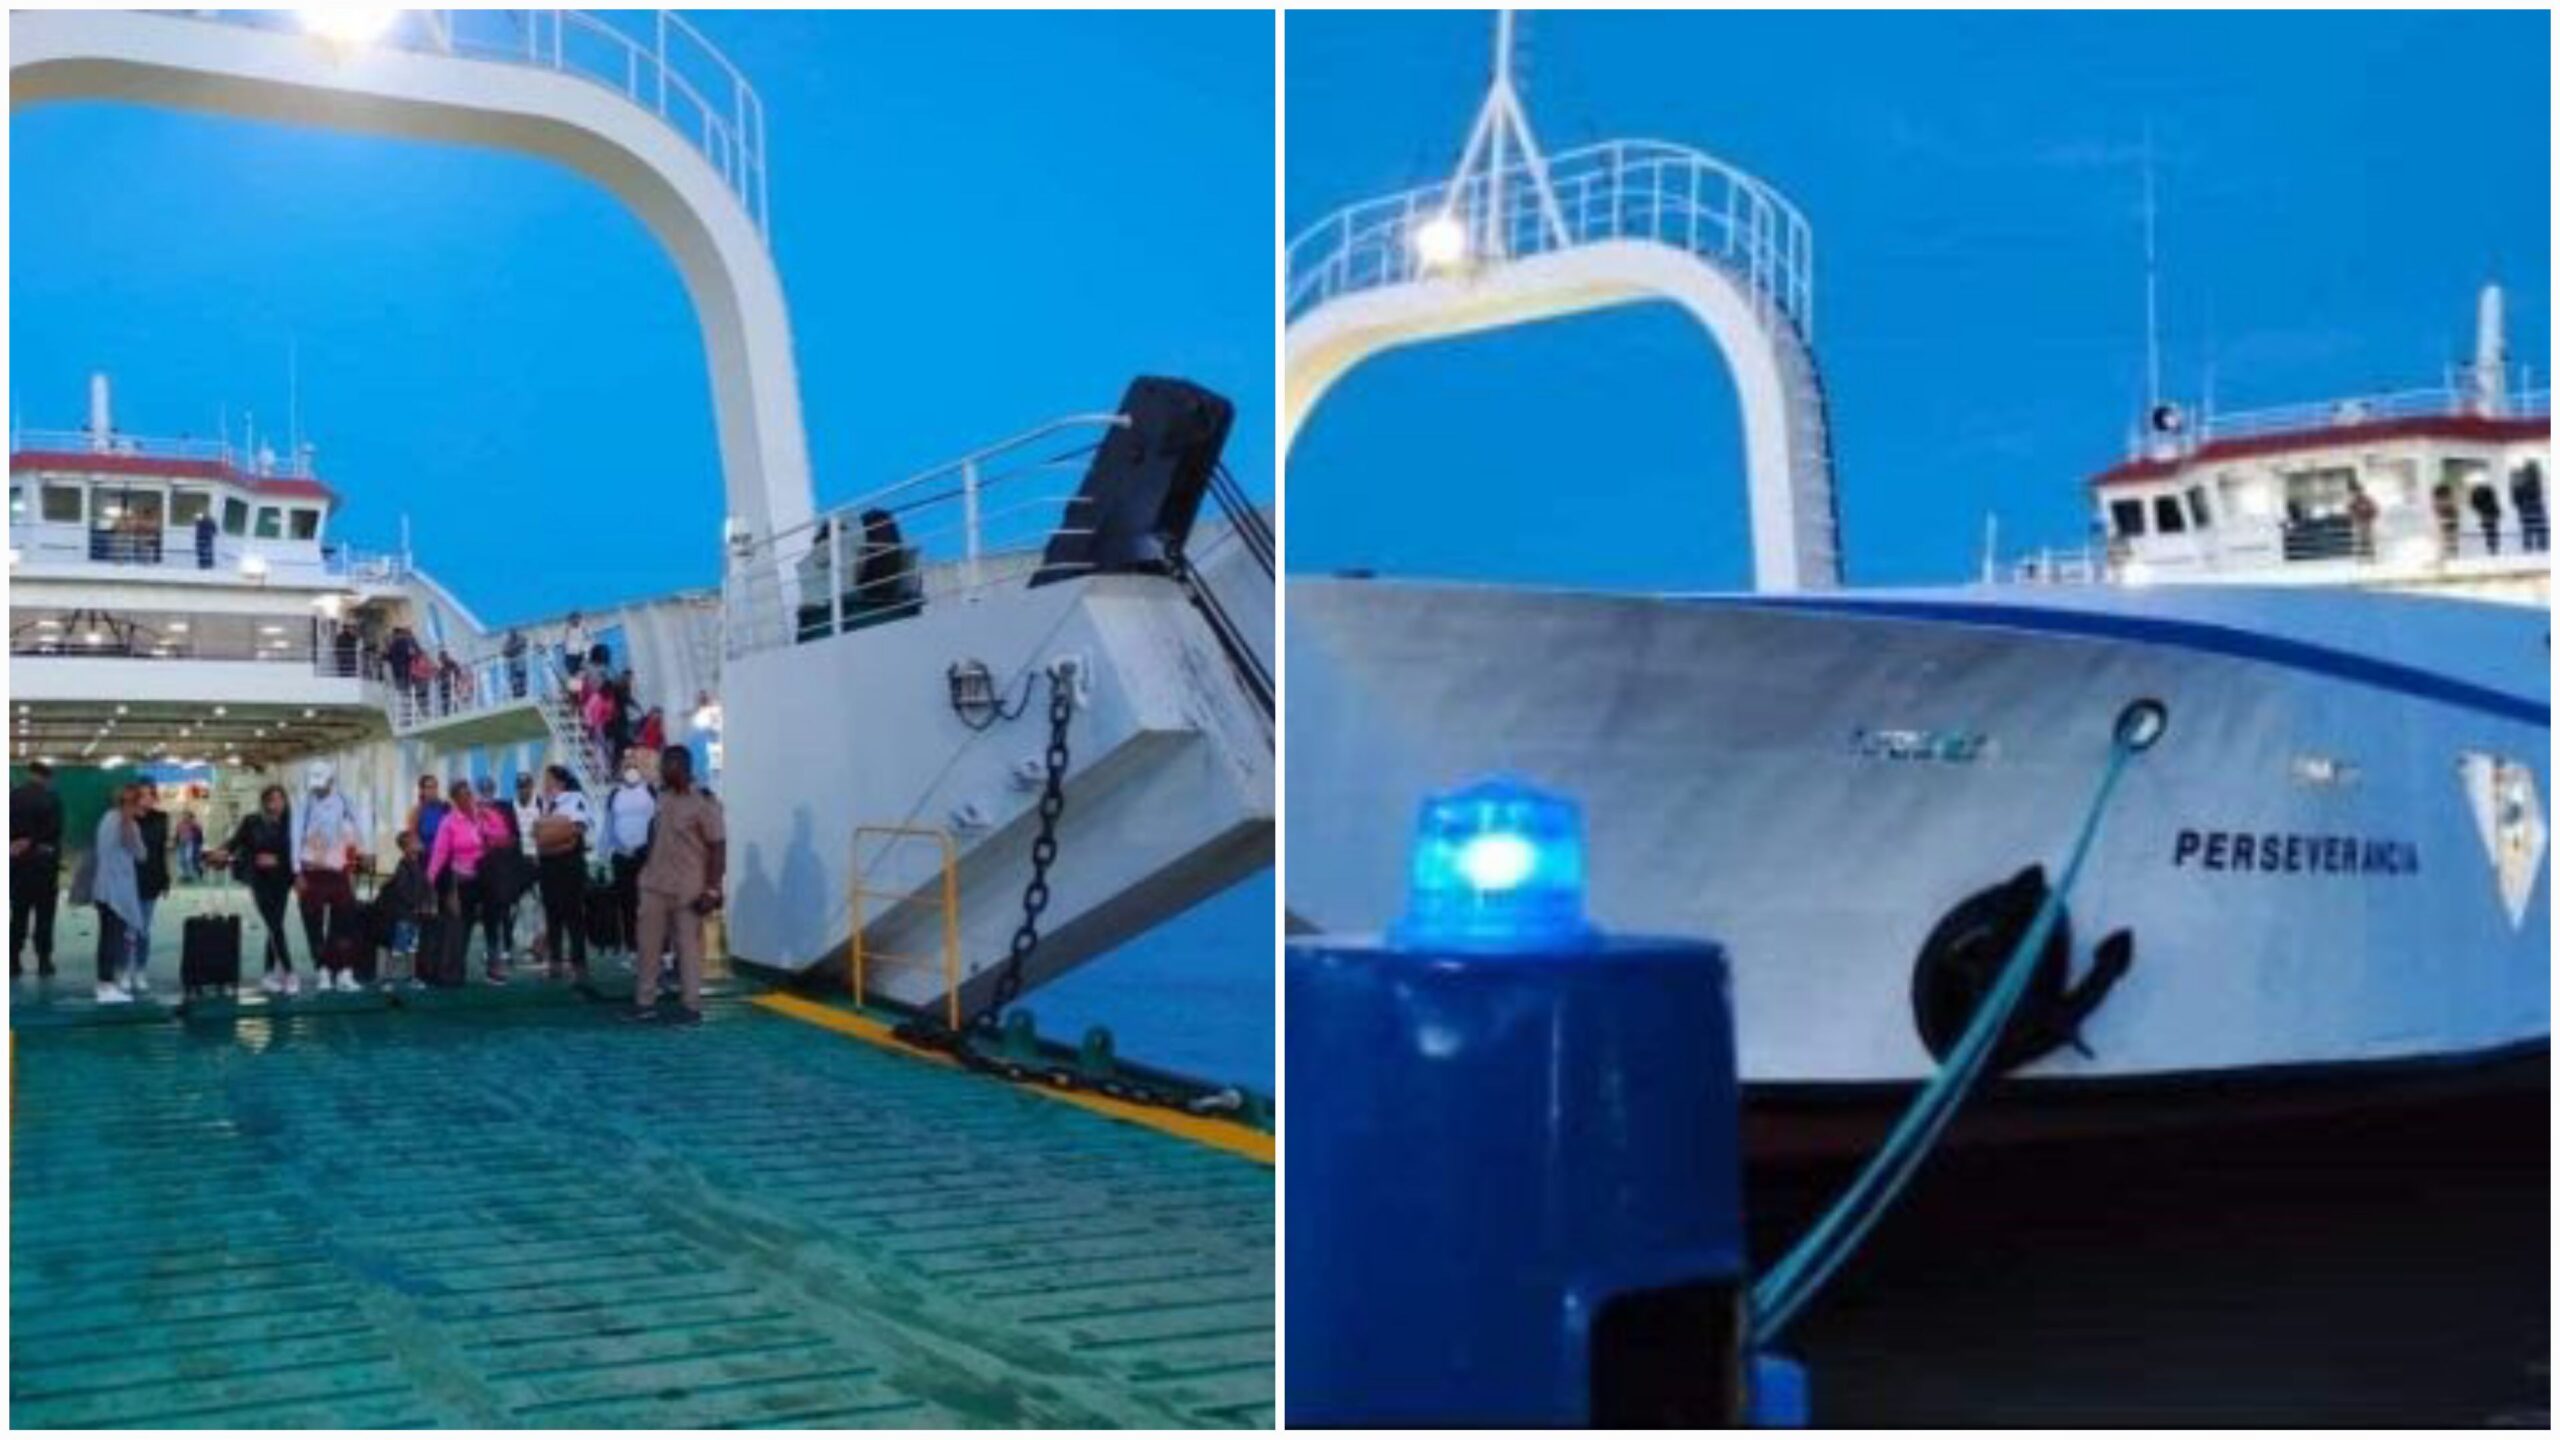 A new Cuba ferry made a test trip with passengers between Nueva Gerona and Patabano